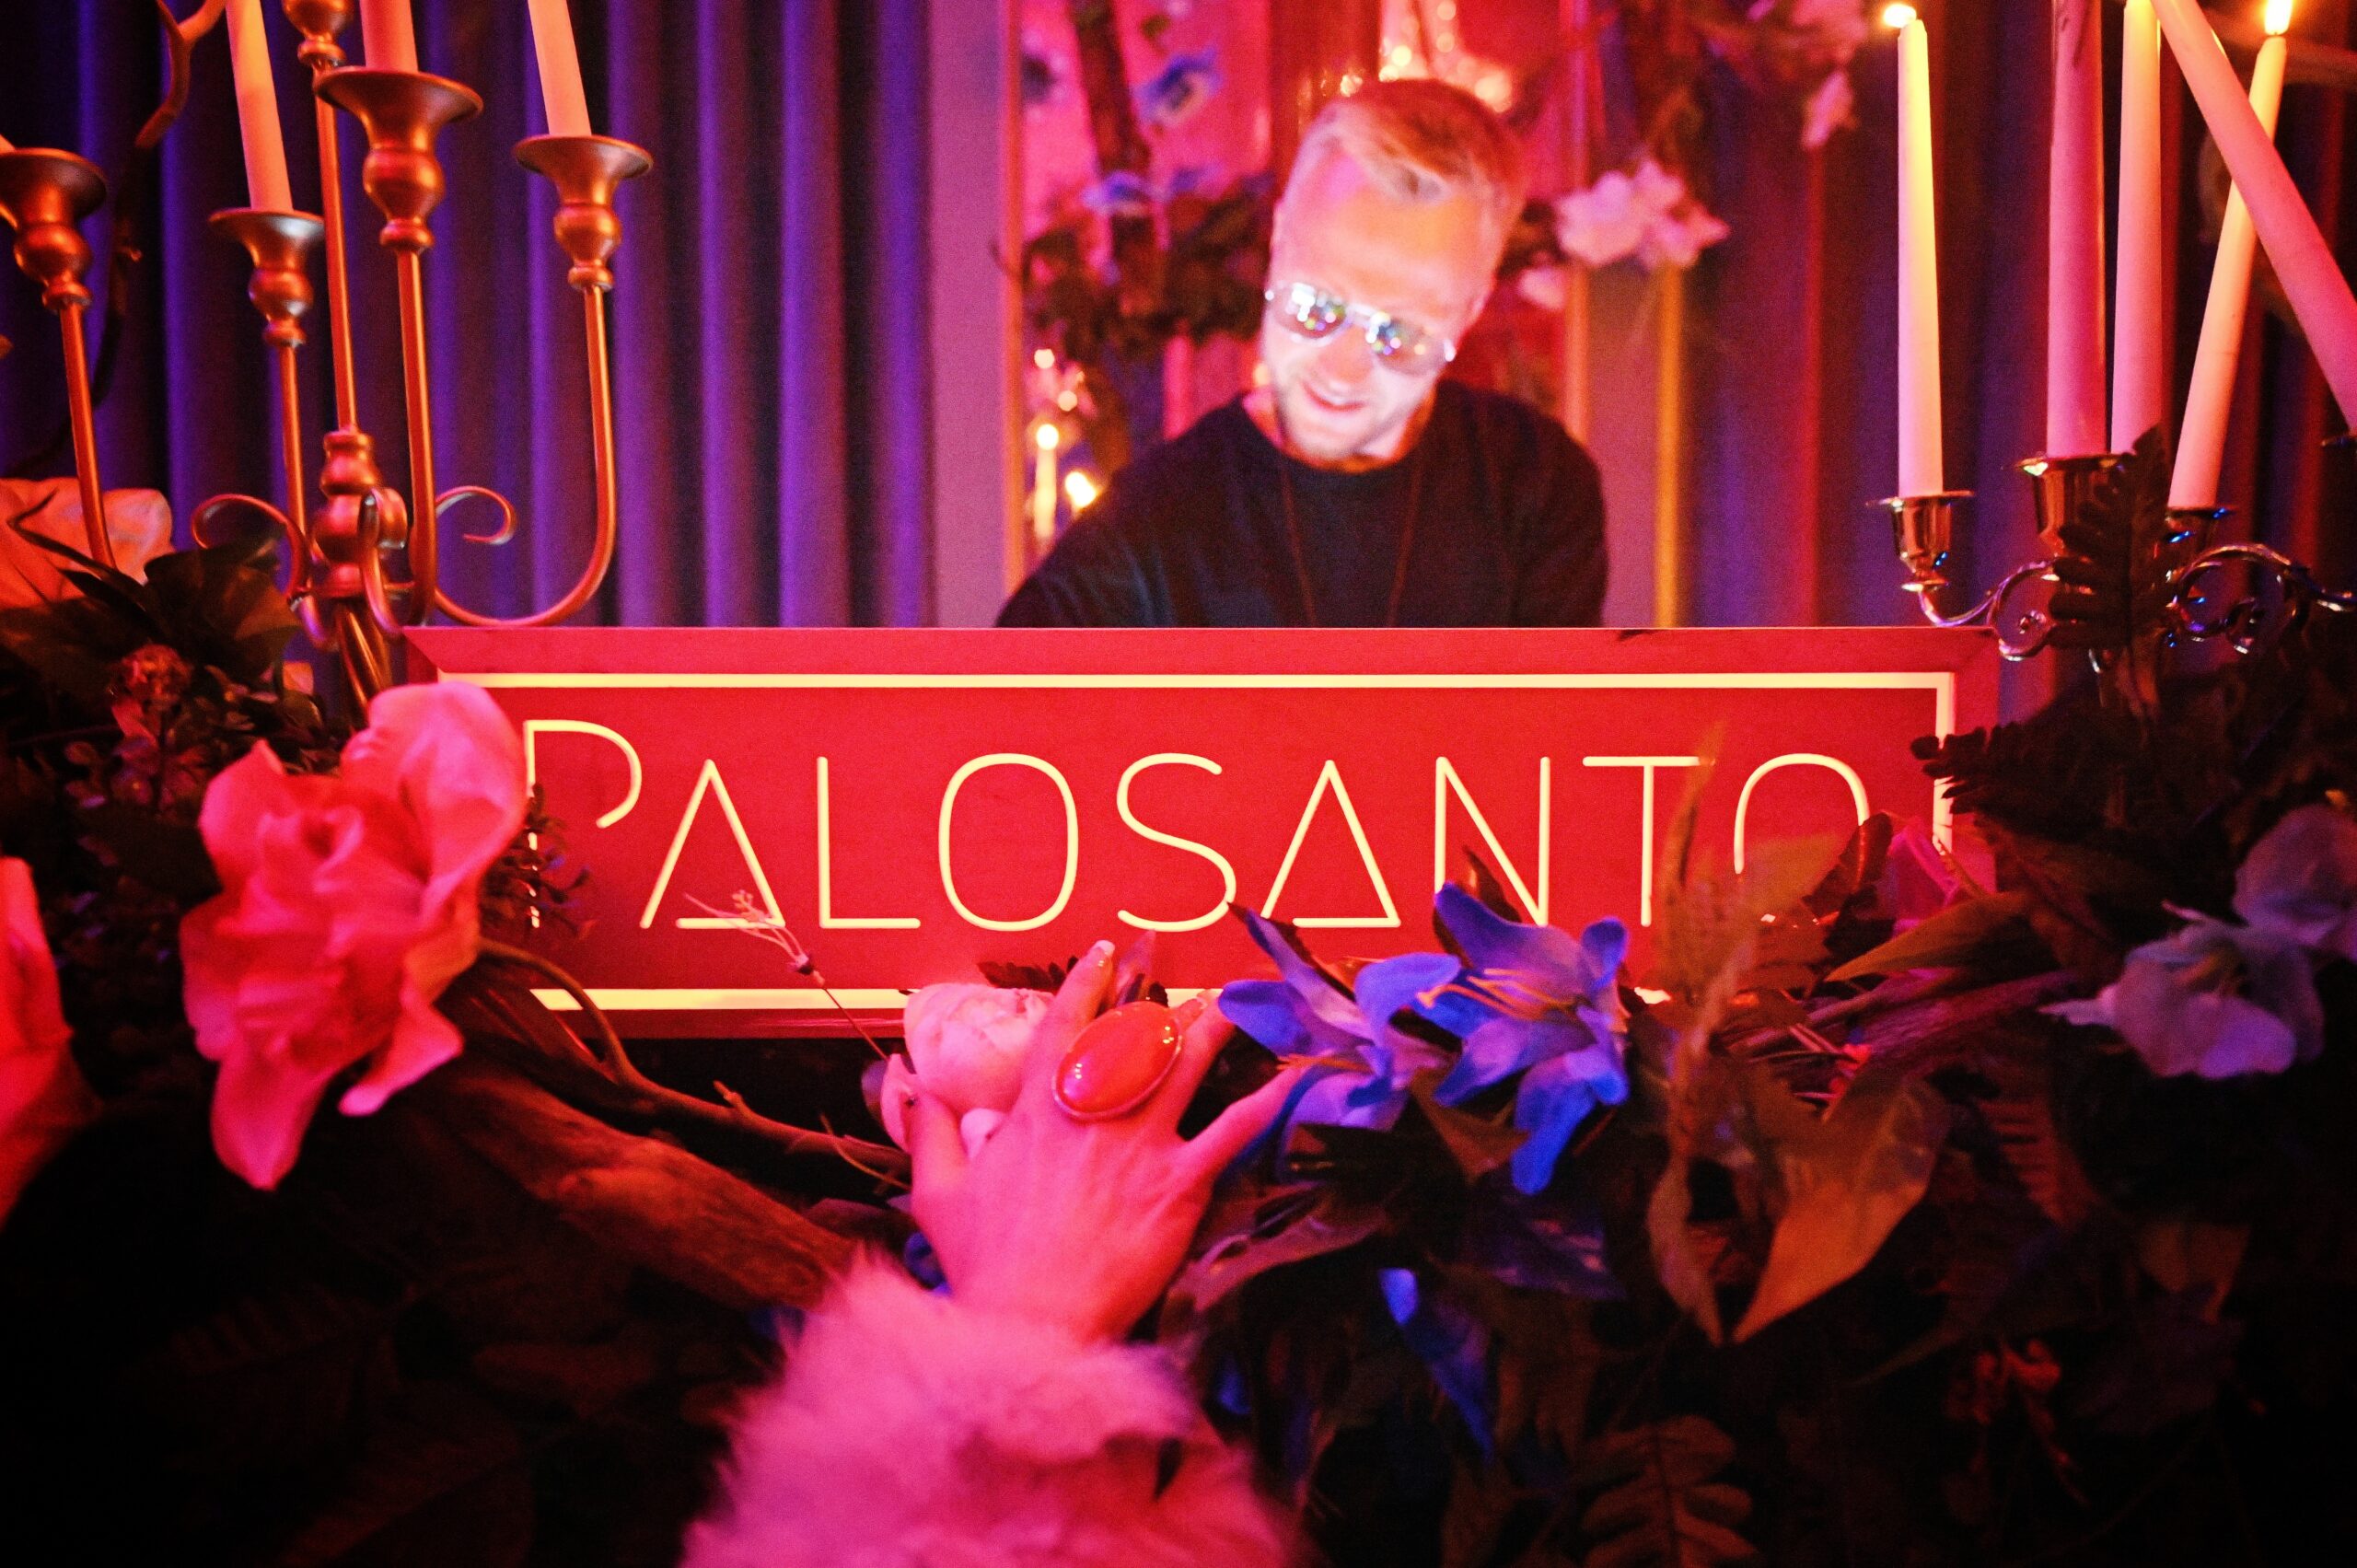 A person with reflective glasses stands behind a red sign that reads "PALO SANTO" amidst decorative flowers and candles in a dimly lit environment.